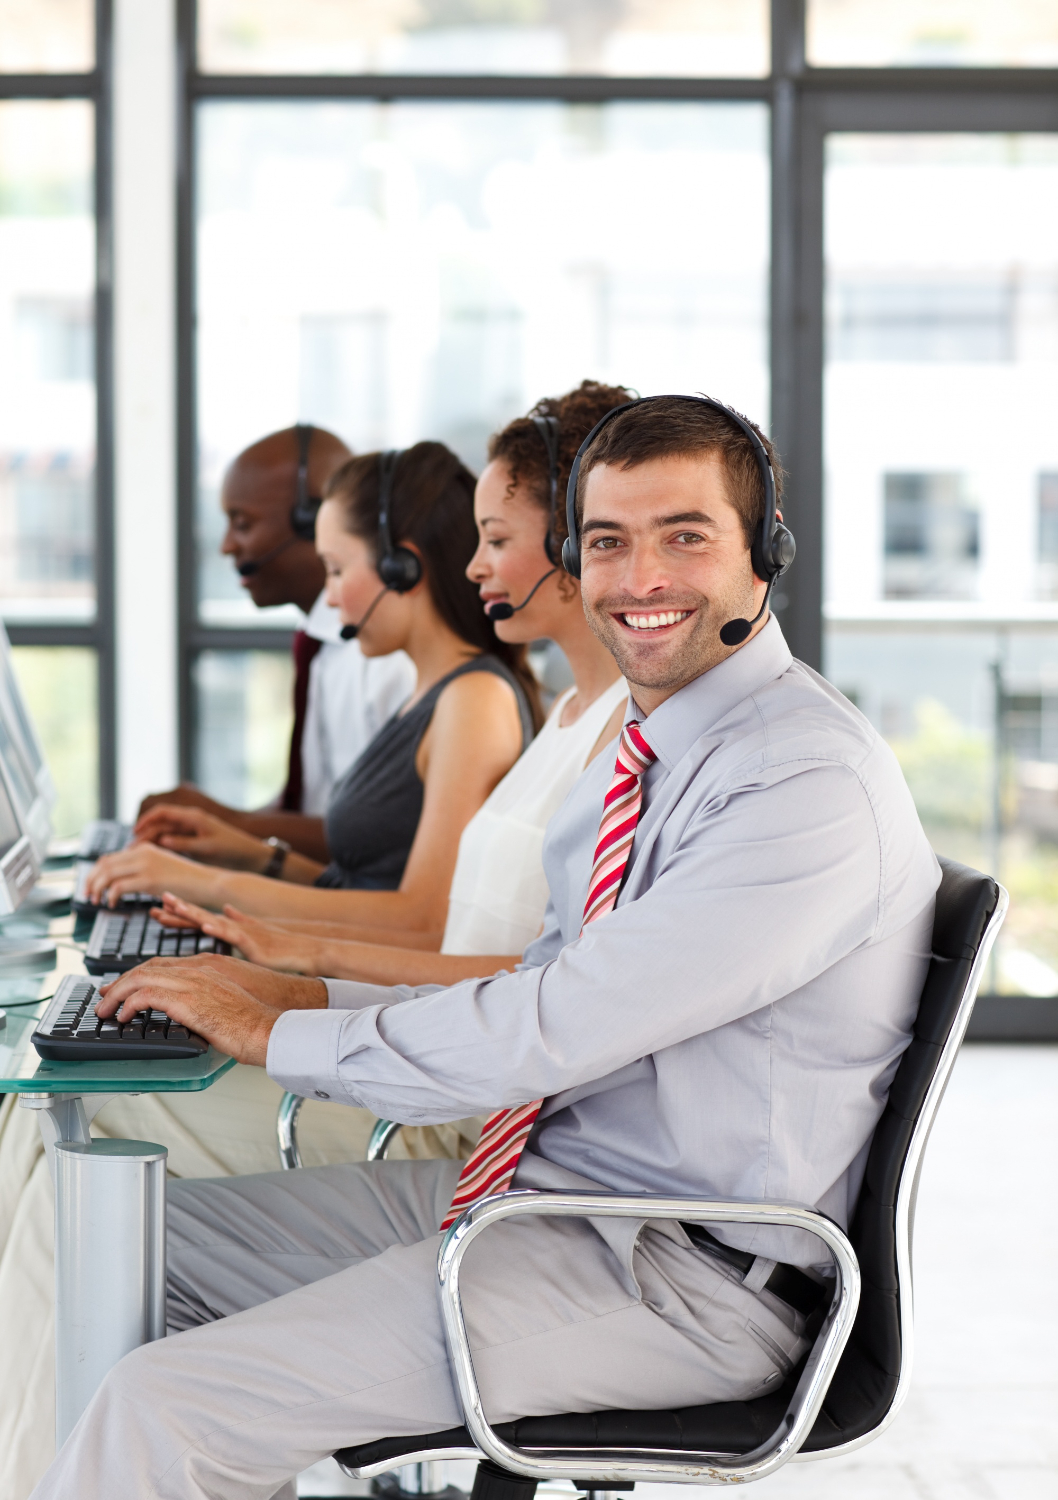 Multilingual call centers are extremely-necessary in the current boom of Big Tech globalization - as they ensure native technical support that brings value to customers and motivates them to long-term loyalty - as shown here, whereby multilingual native-speaking technical support reps provide stellar outsourced solutions for Big Tech players looking to go-global.